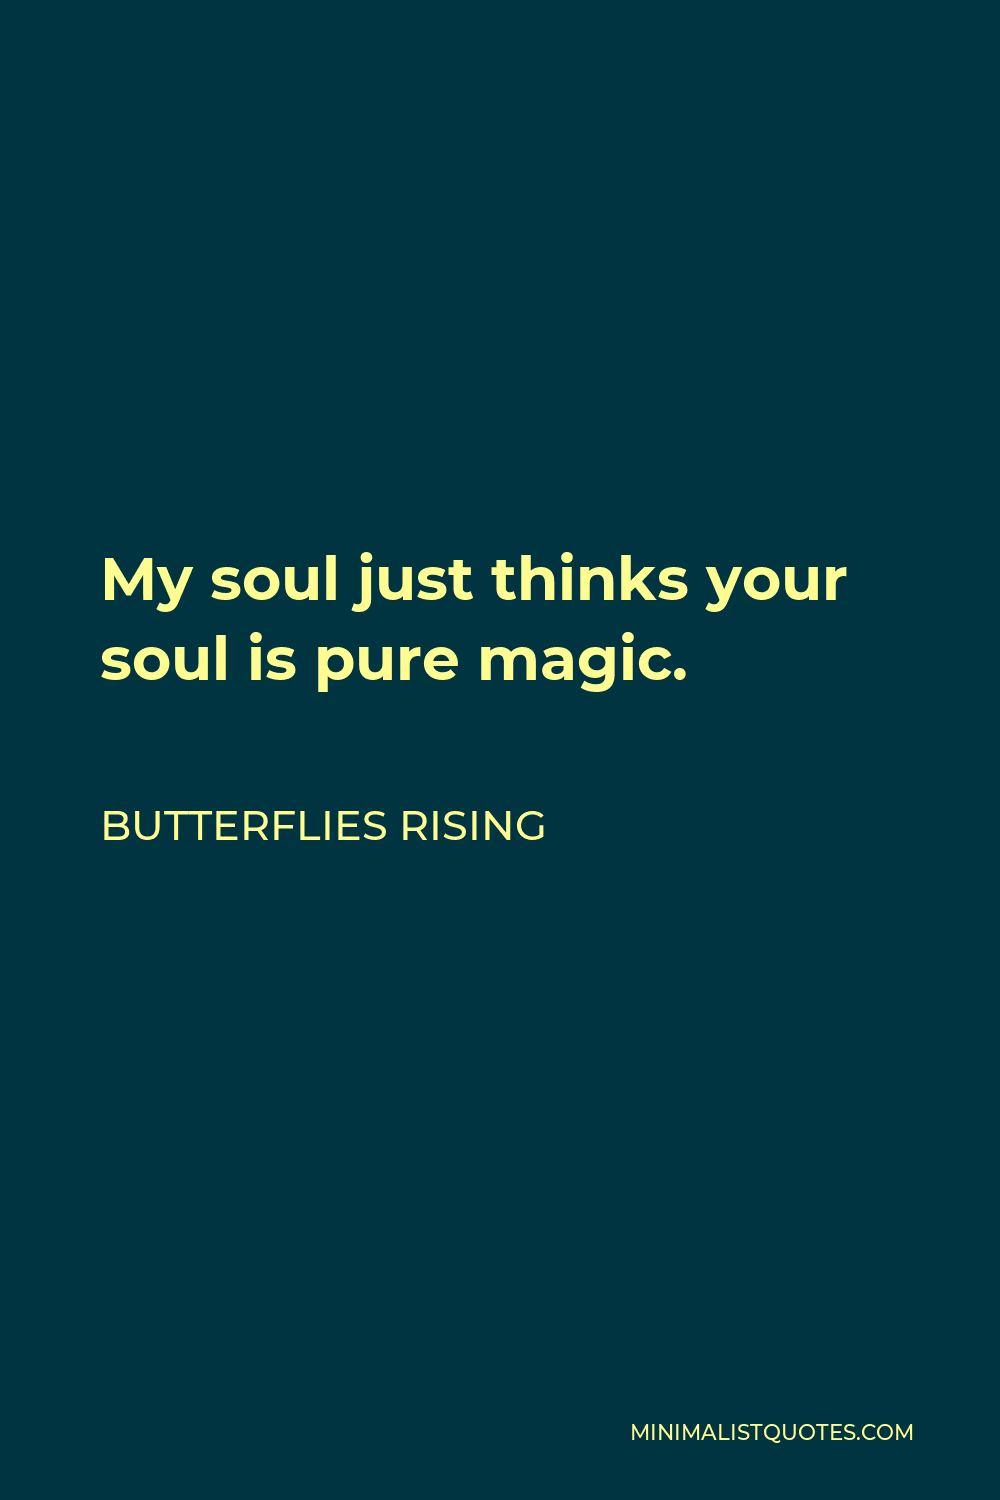 Butterflies Rising Quote - My soul just thinks your soul is pure magic.